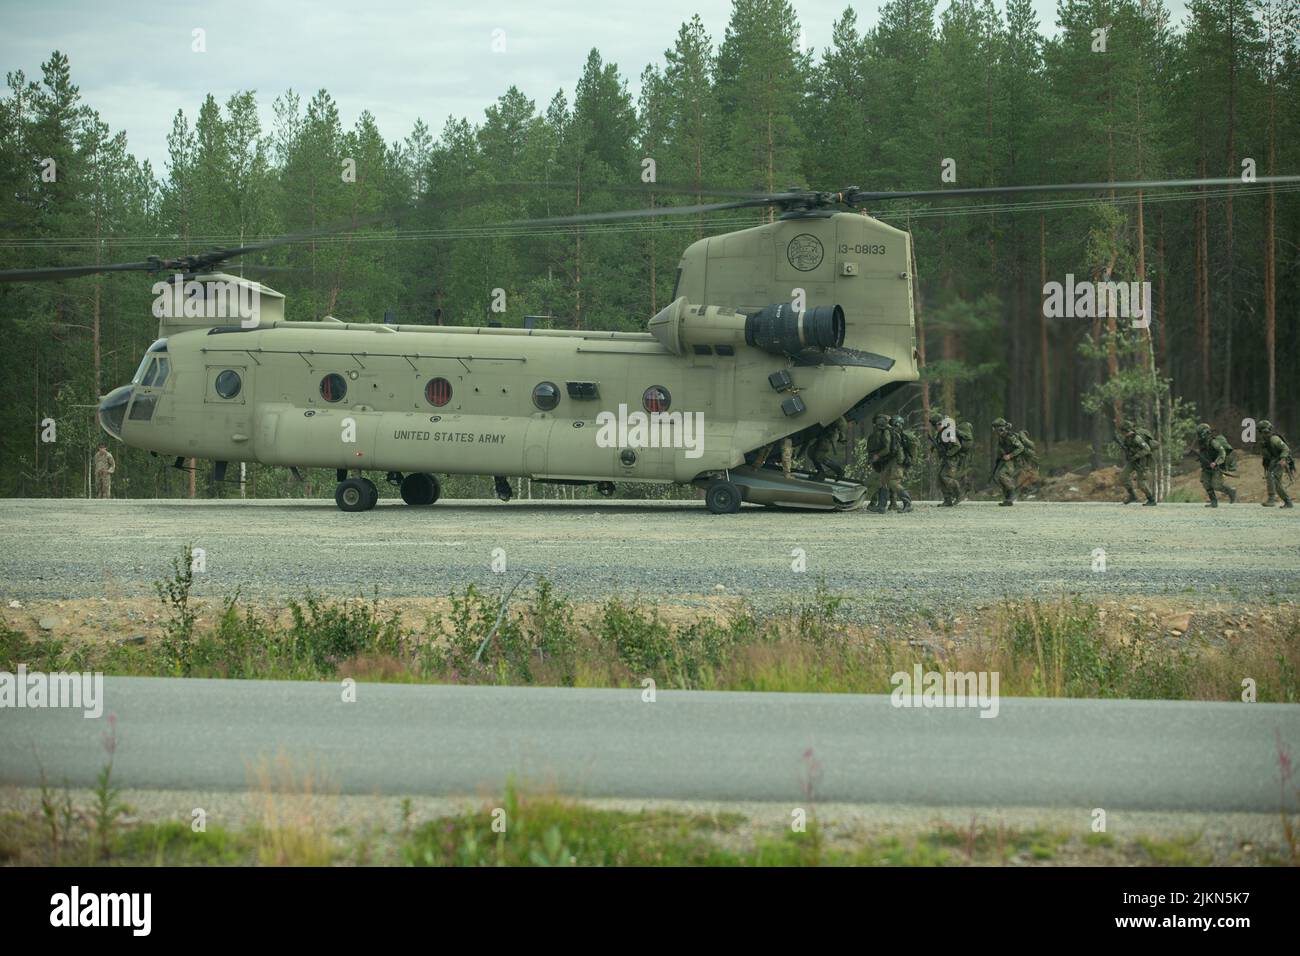 Finnish soldiers assigned to the Kainuu Brigade board a U.S. Army CH-47 Chinook helicopter to begin exercise Ryske 22 at Sodankyla, Finland, July 25, 2022. Ryske 22 is a combined, joint training exercise conducted by the United States, Finland, and Norway to strengthen relations and help build interoperability between partner nations. The 2nd BCT is part of the 101st Airborne Division (Air Assault), under command and control of V Corps, America's forward-deployed corps in Europe, working alongside NATO allies and regional security partners to provide combat-credible forces. (U.S. Army photo by Stock Photo